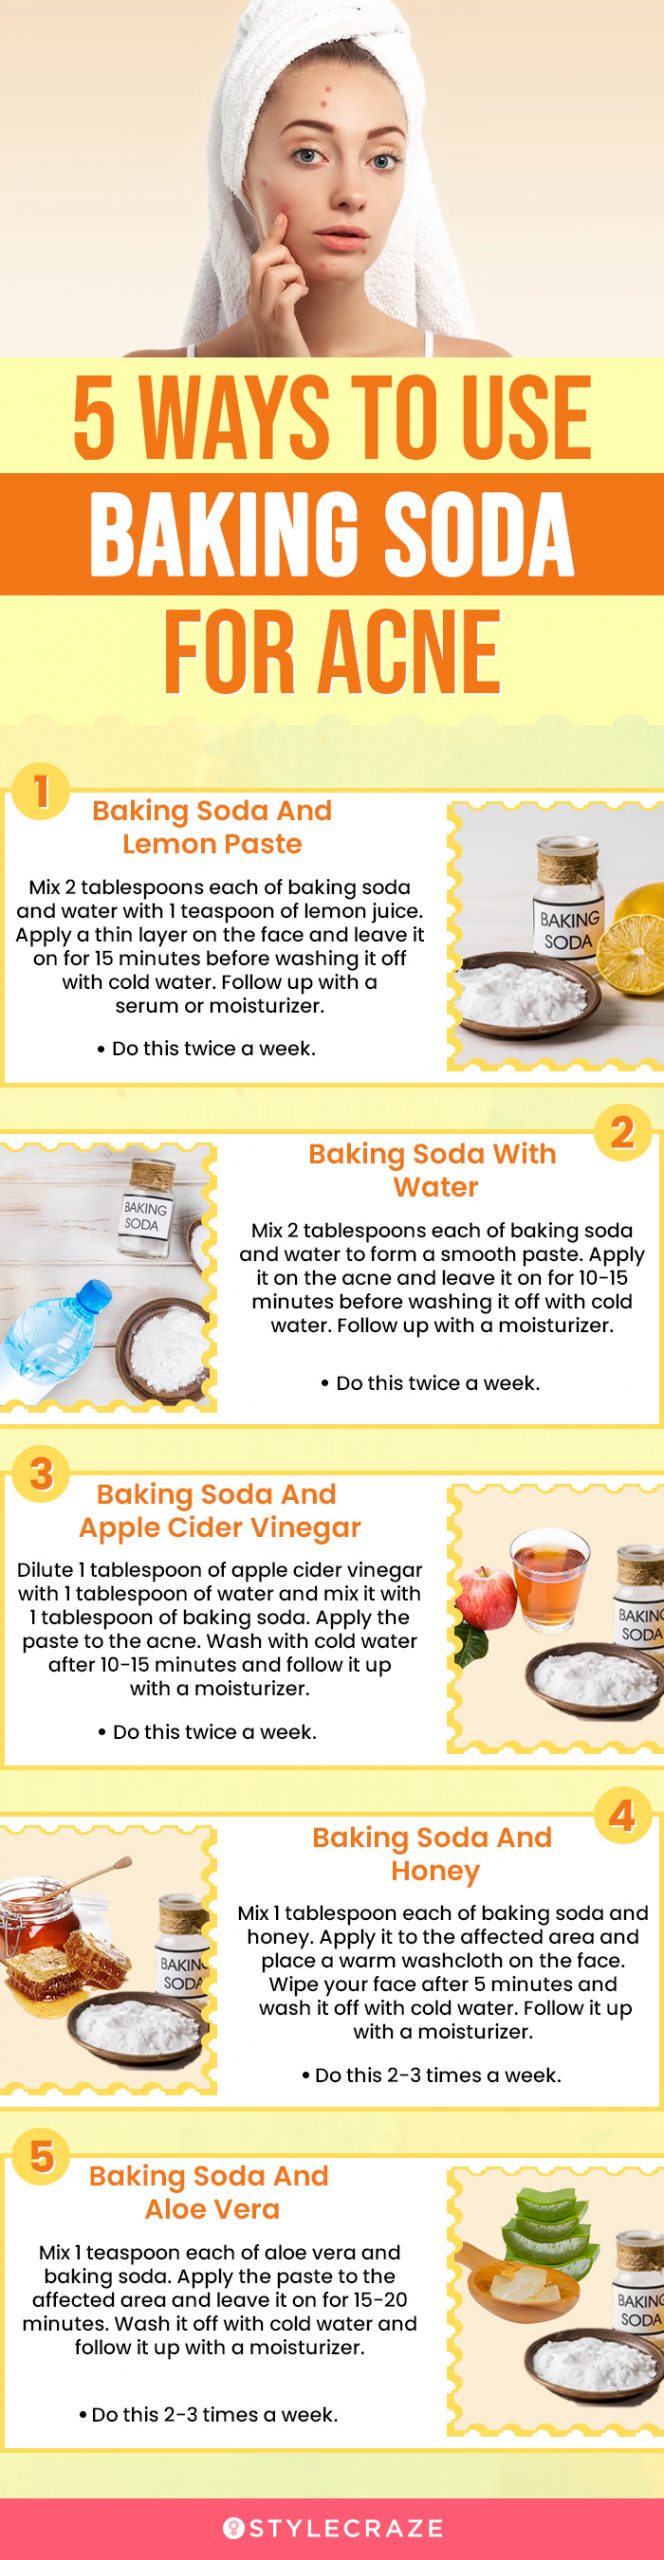 5 ways to use baking soda for acne (infographic)